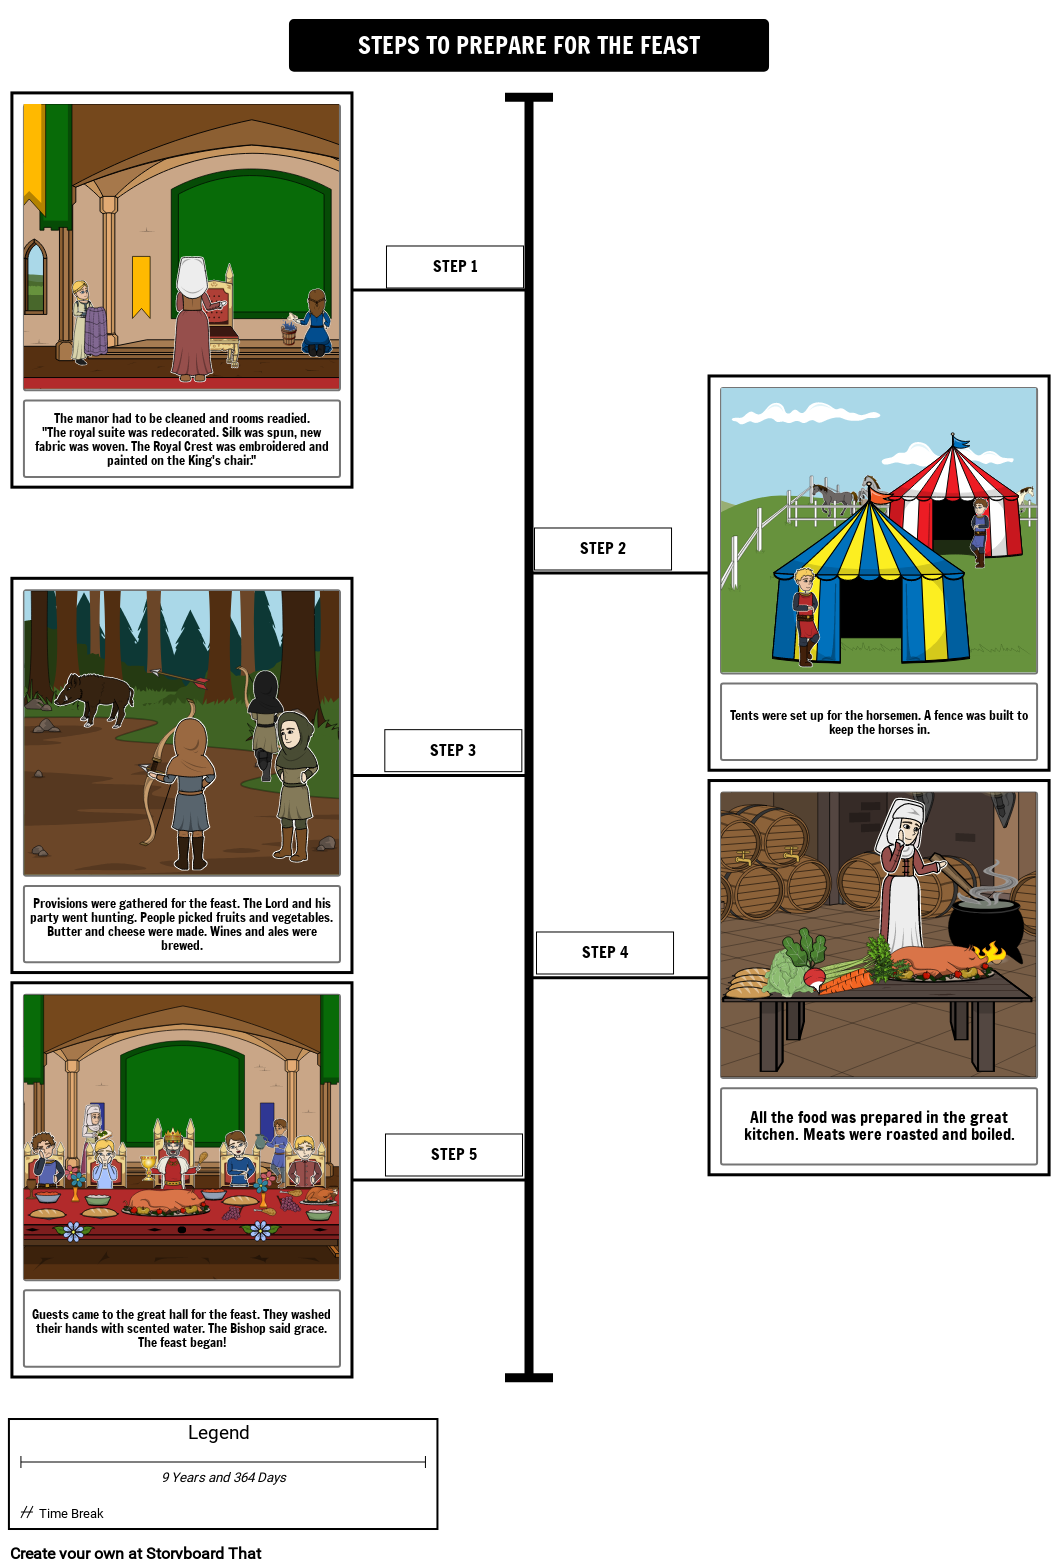 A Medieval Feast Timeline